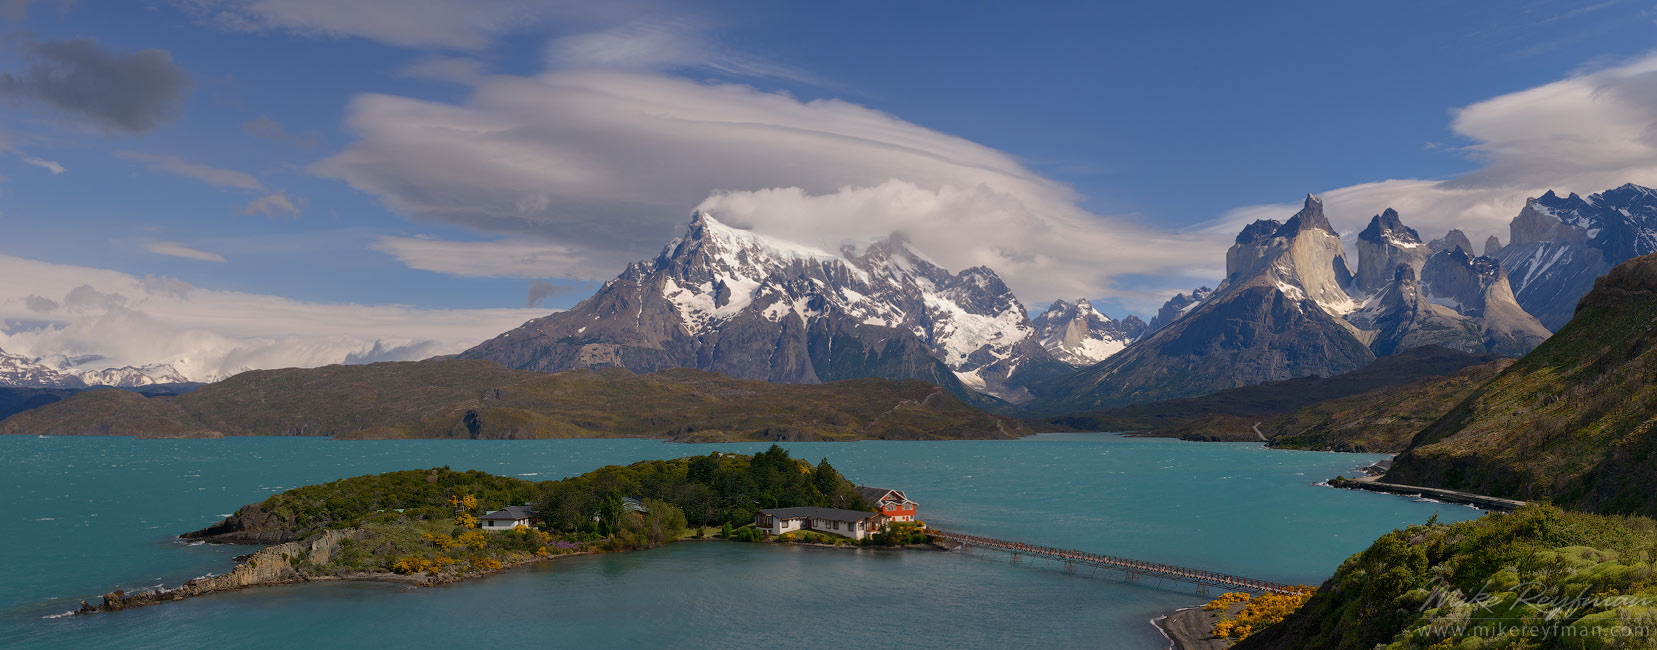 Hosteria Pehoe, Lago Pehoe and Cordillera del Paine as seen from Mirador Condores. Torres del Paine National Park, Ultima Esperanza Province, Magallanes and Antartica Chilena Region XII, Patagonia, Chile.